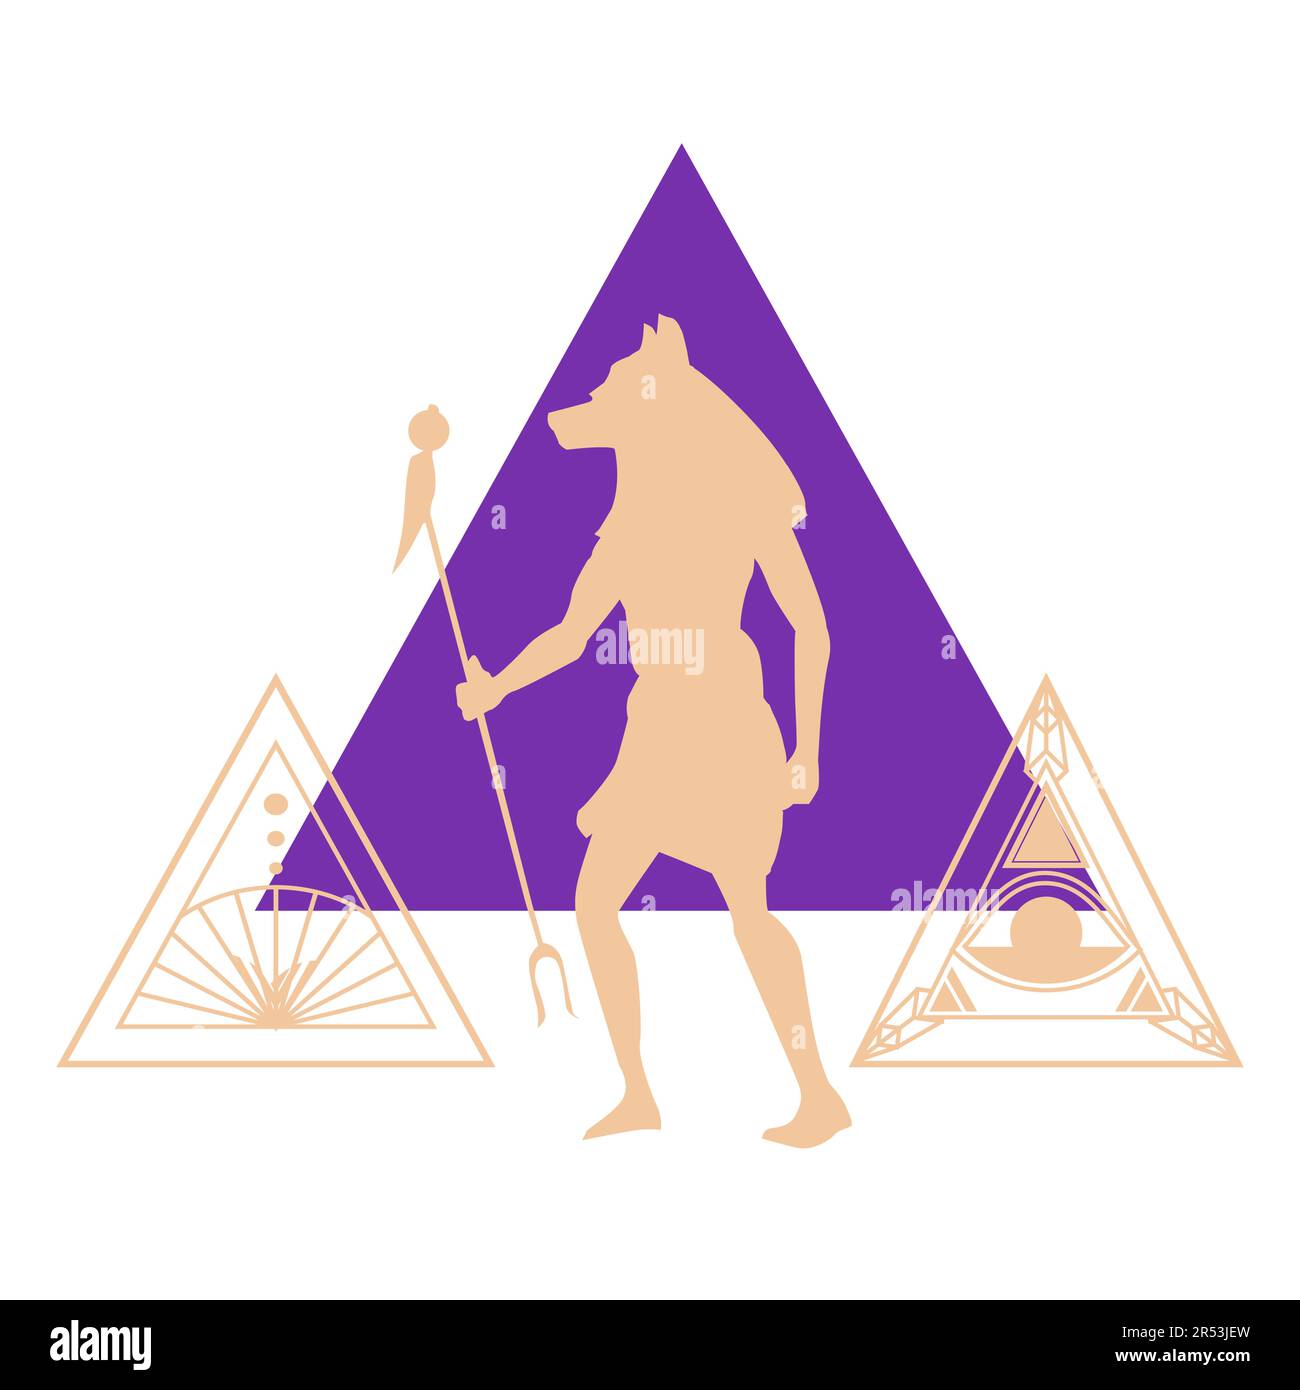 design for t-shirts of the god anubis next to a violet triangle. vector illustration on esoteric themes of ancient egypt Stock Vector